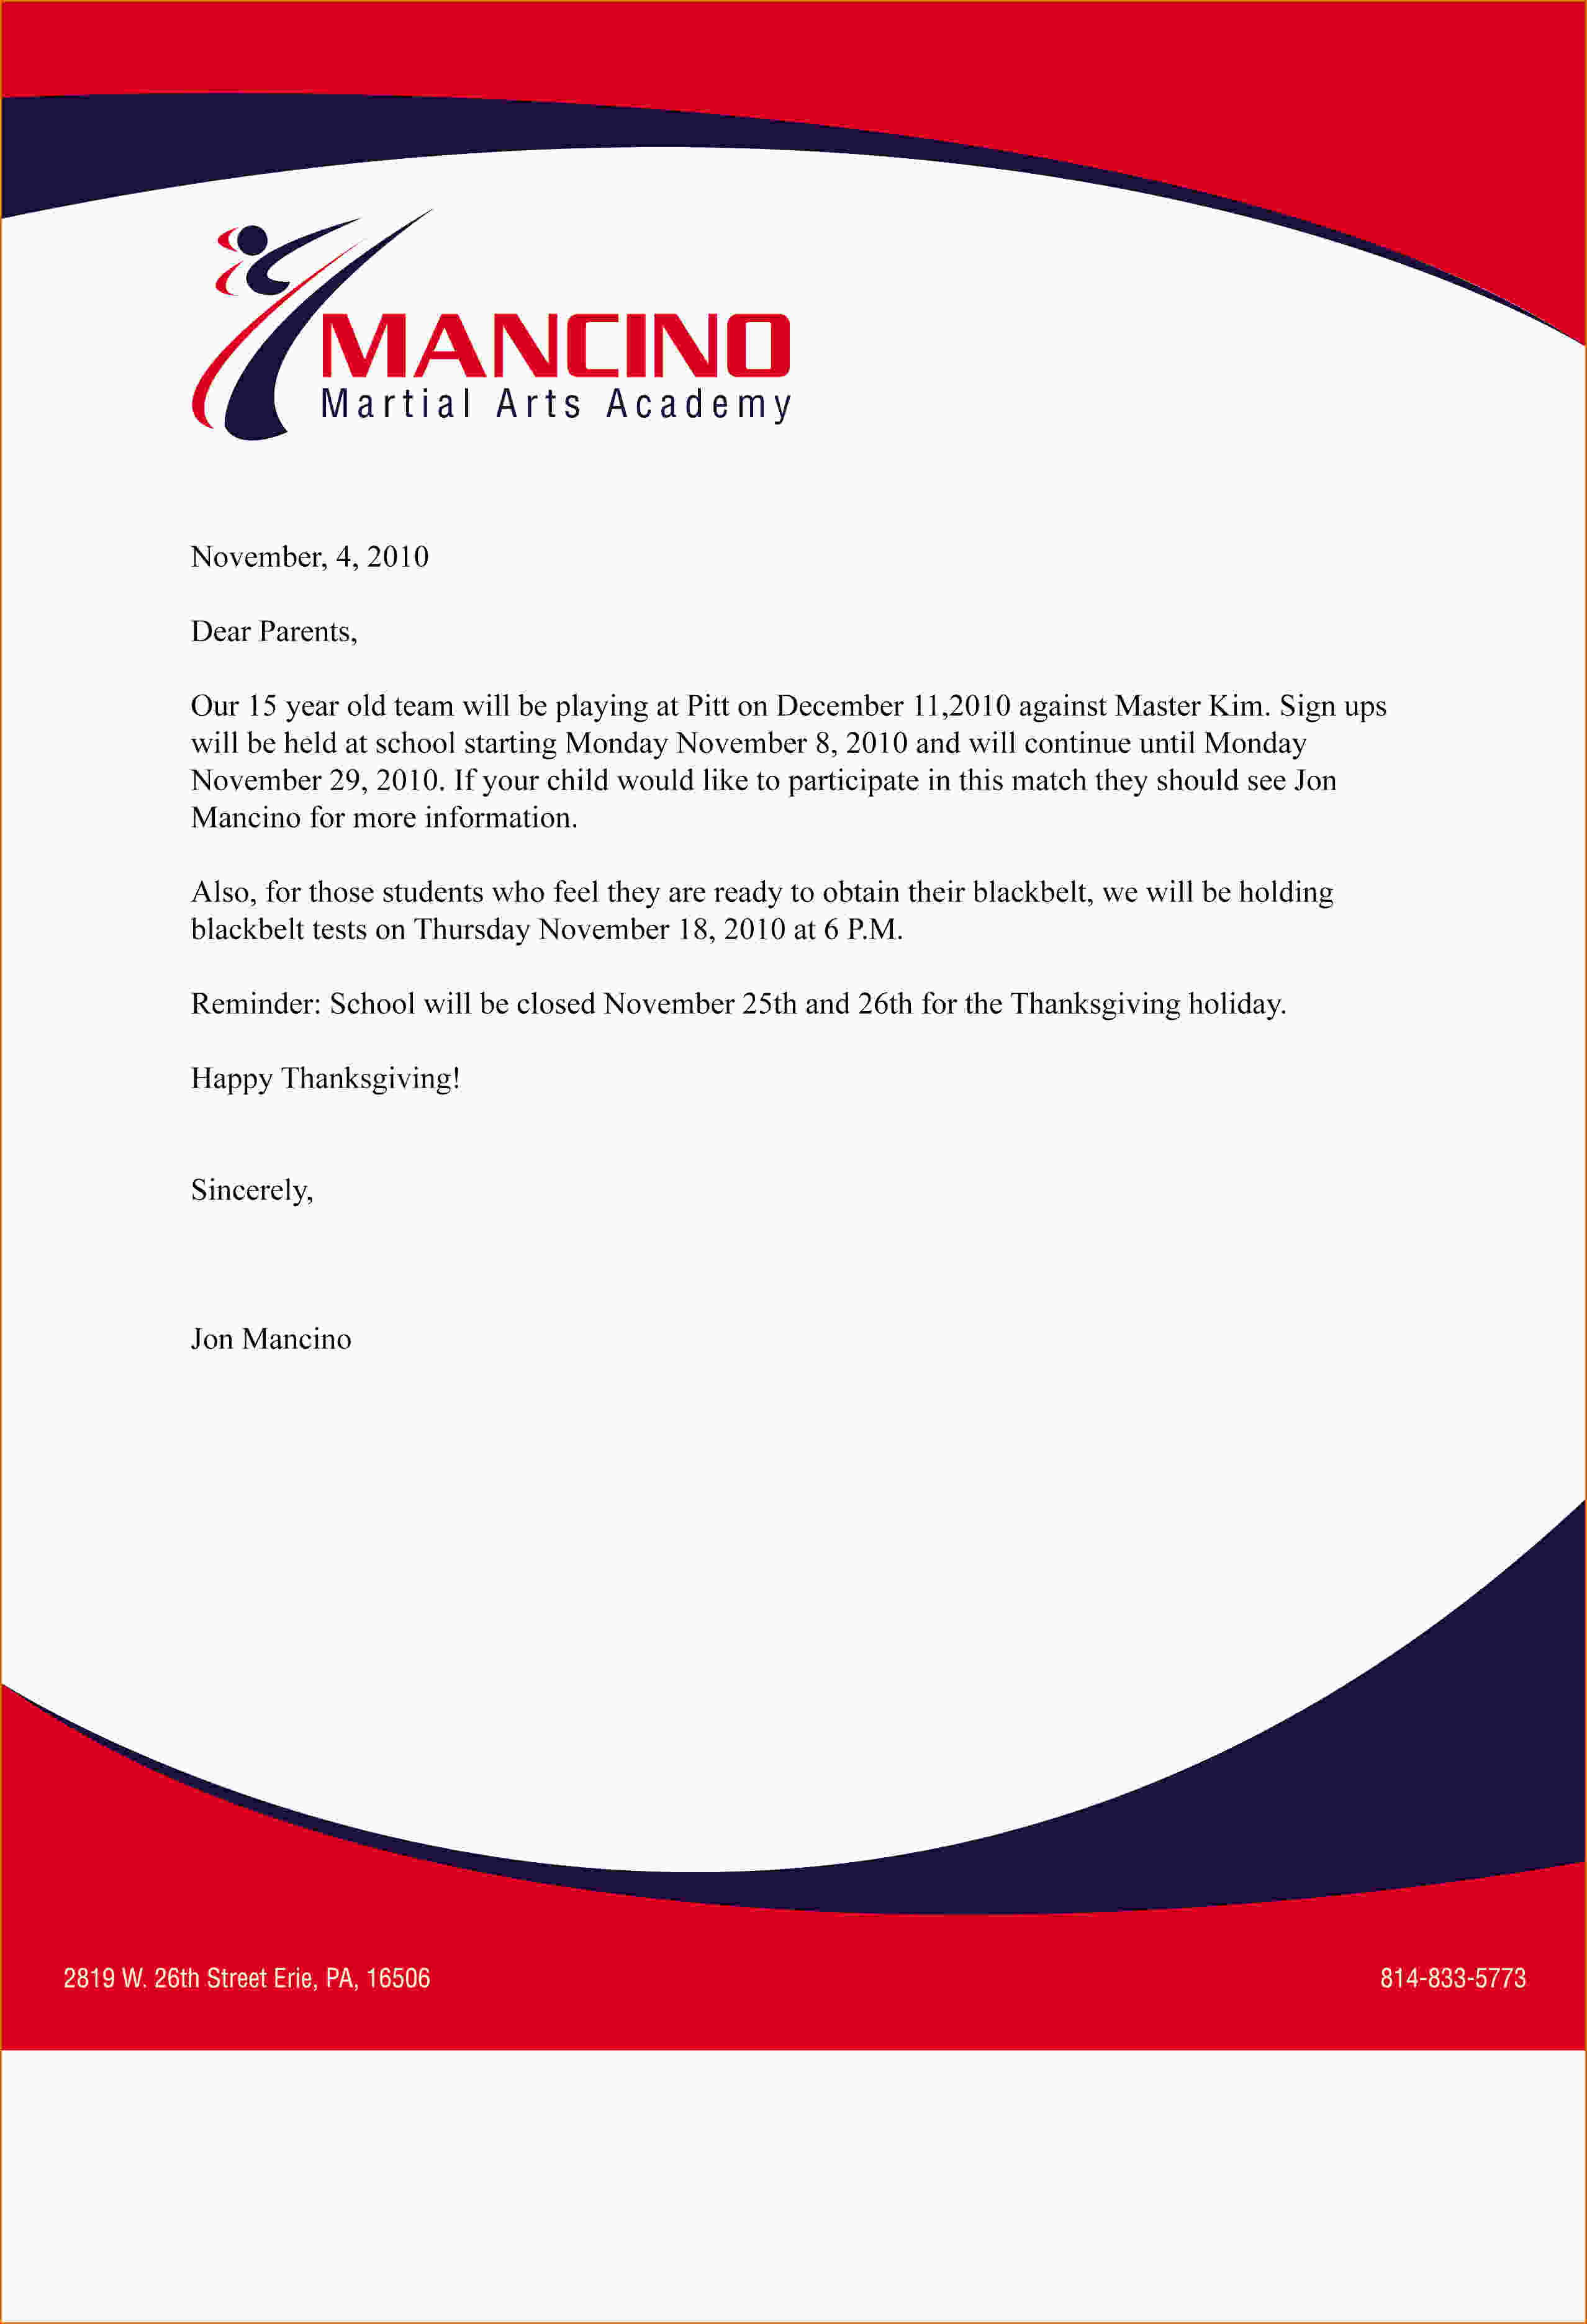 Business Letter Example with Letterhead Soccer 5 Live